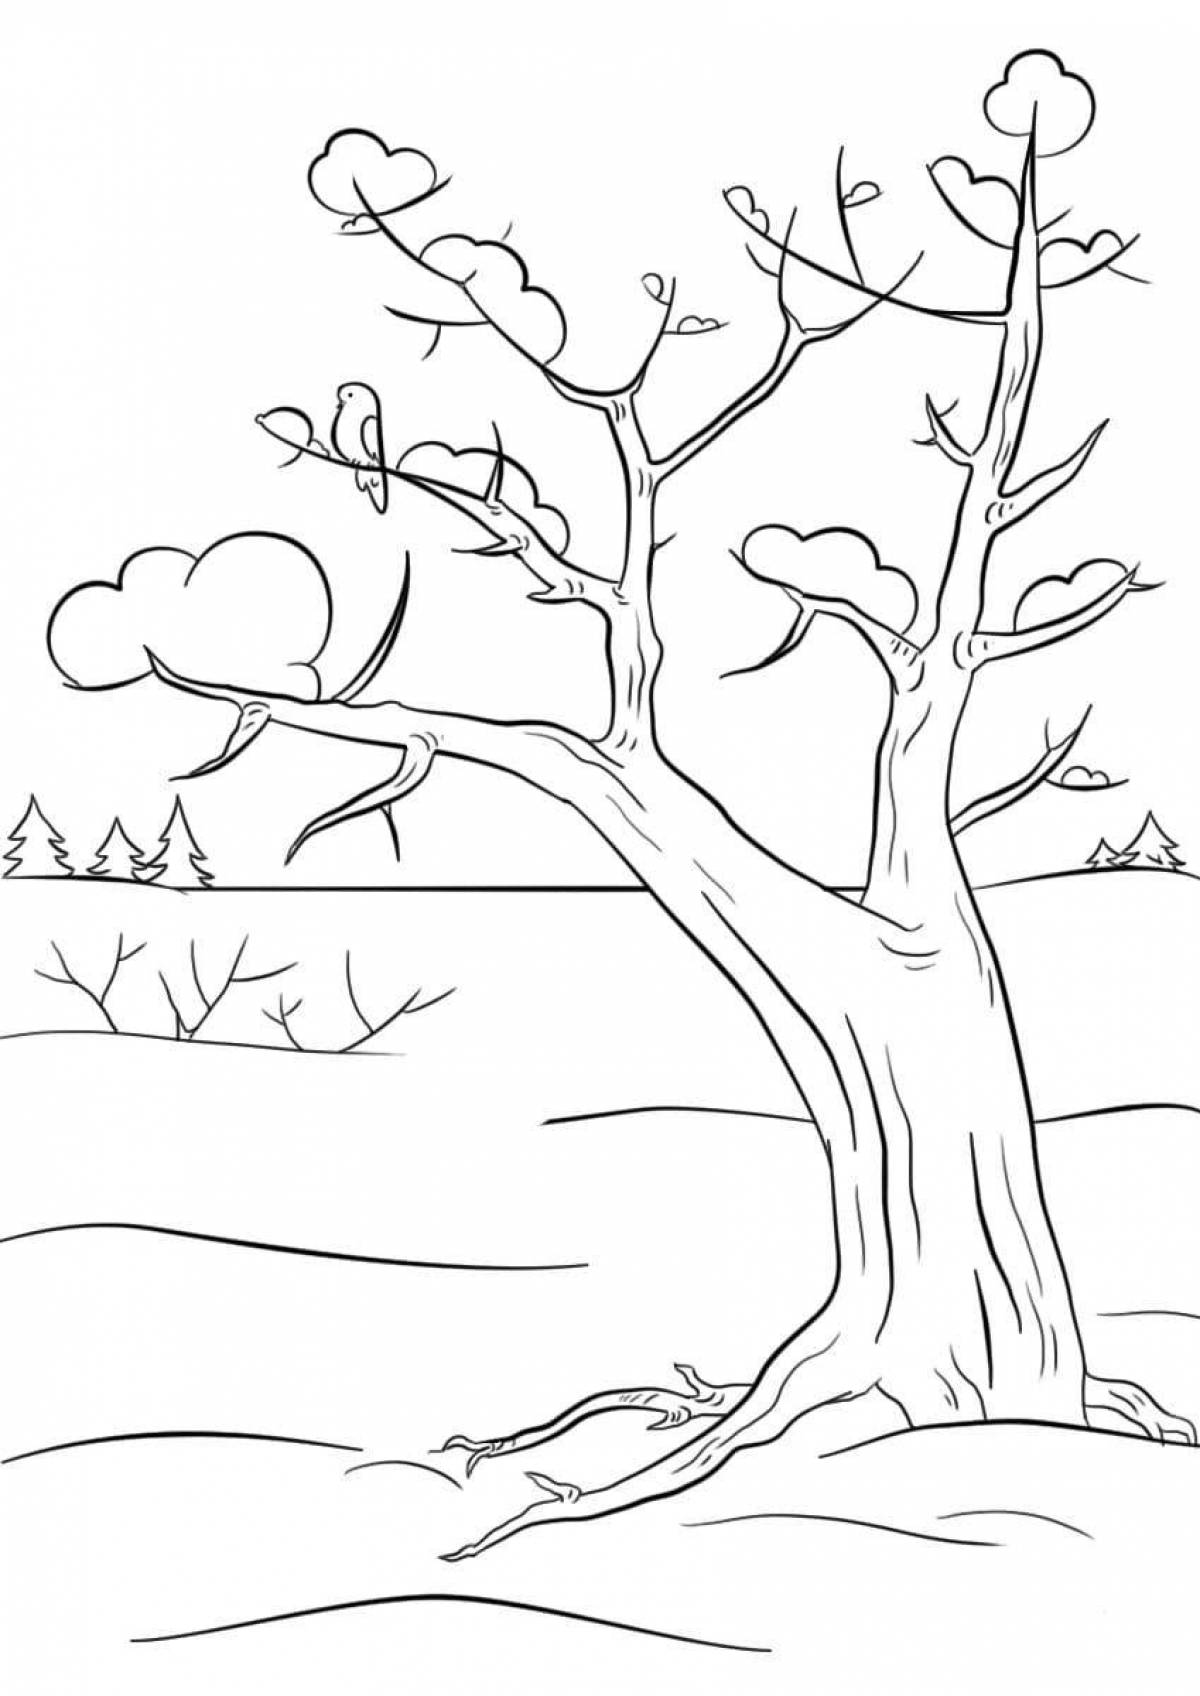 Coloring book gorgeous winter tree